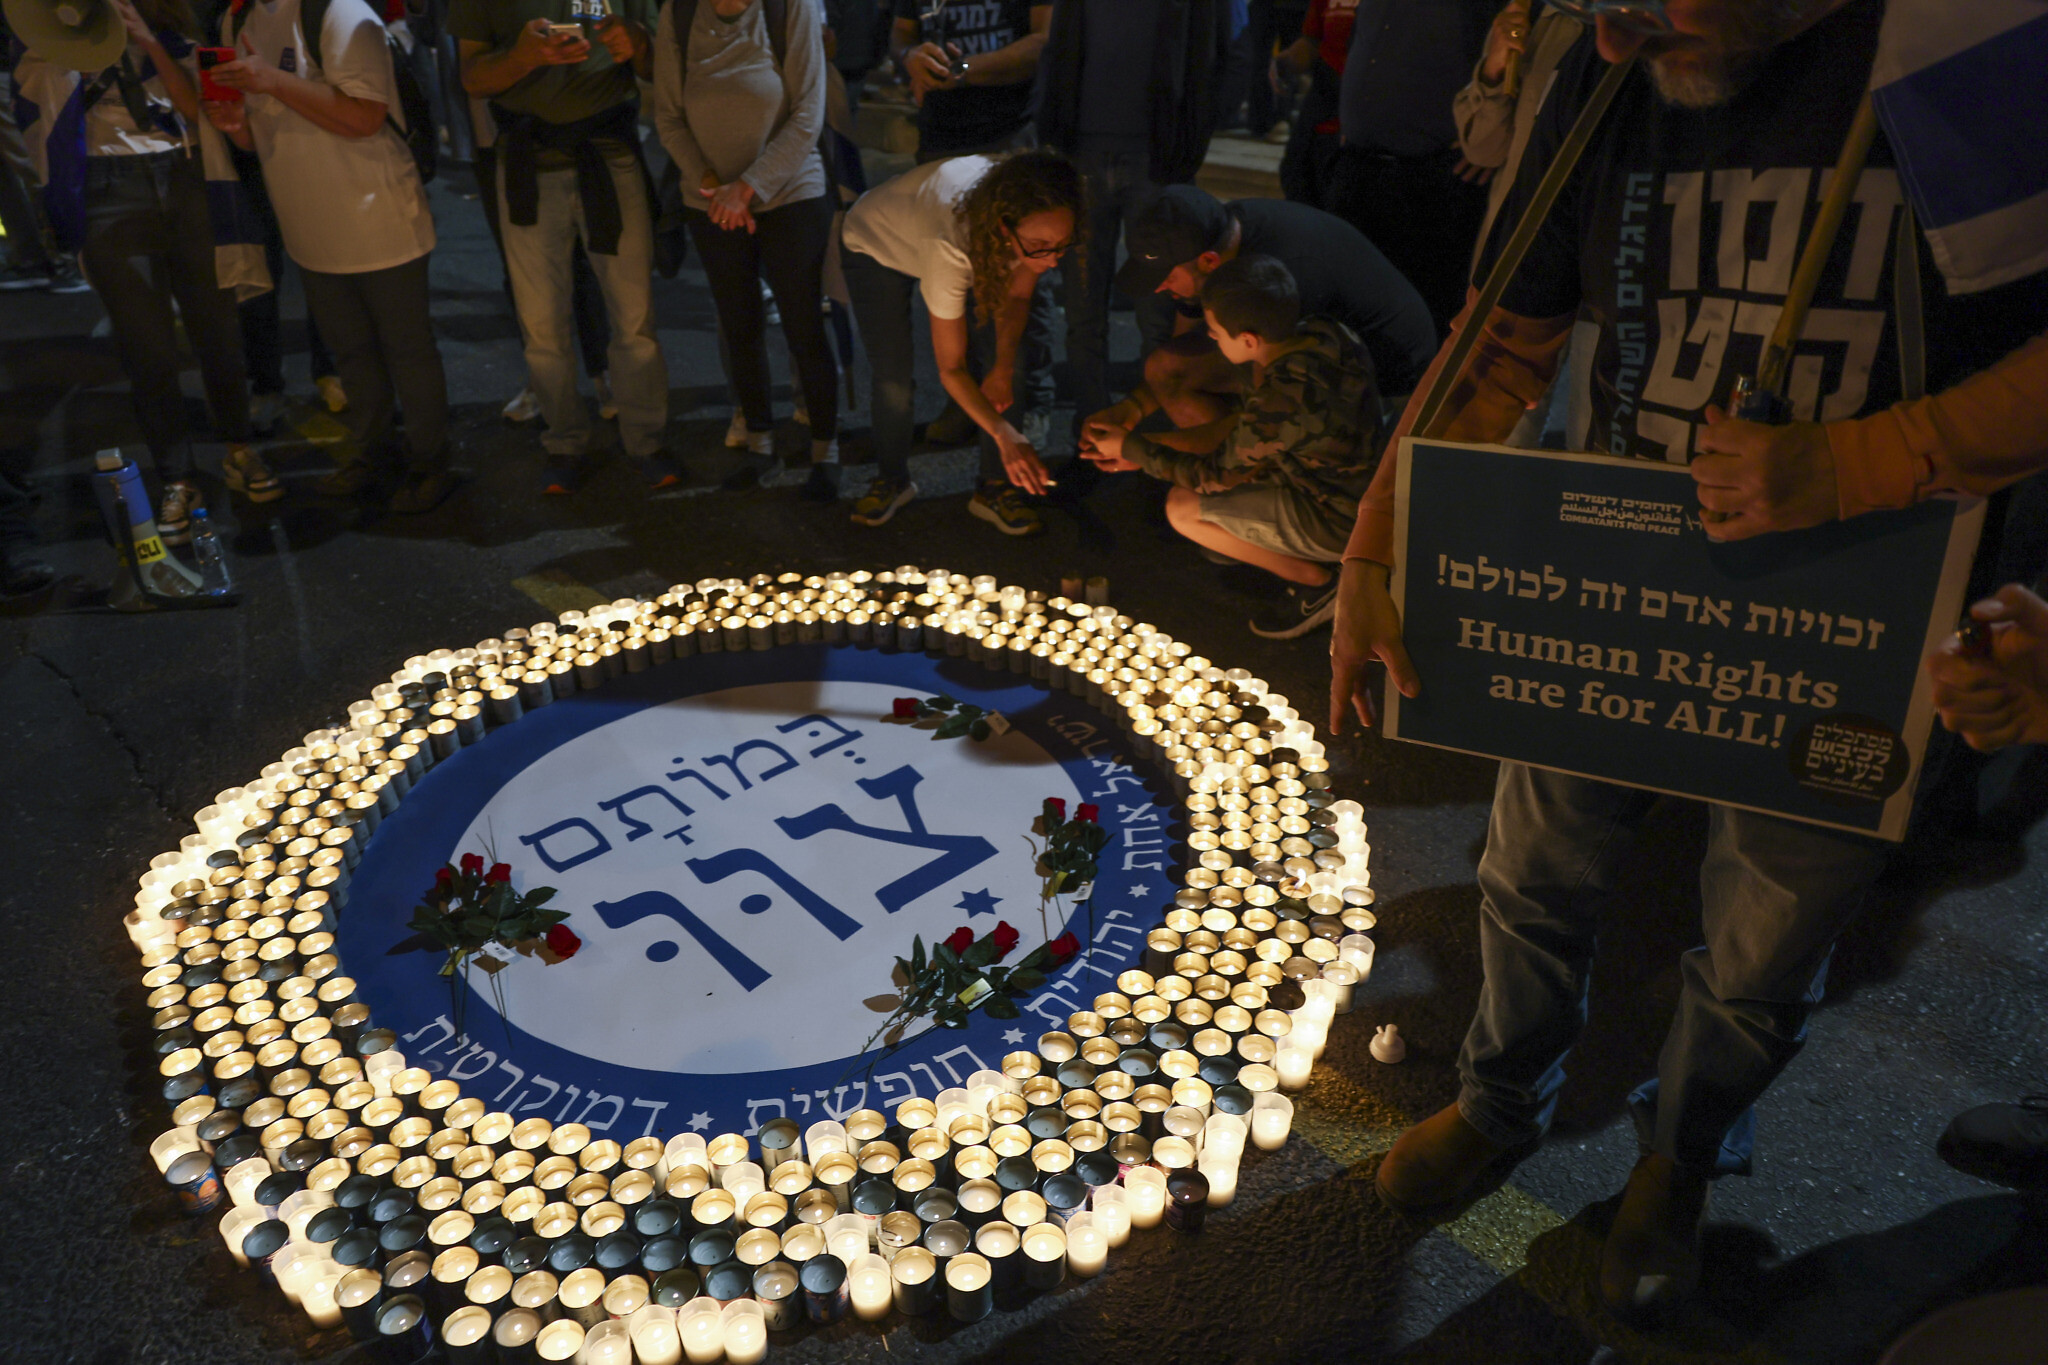 With memorial candles, protesters across Israel rally against judicial ...